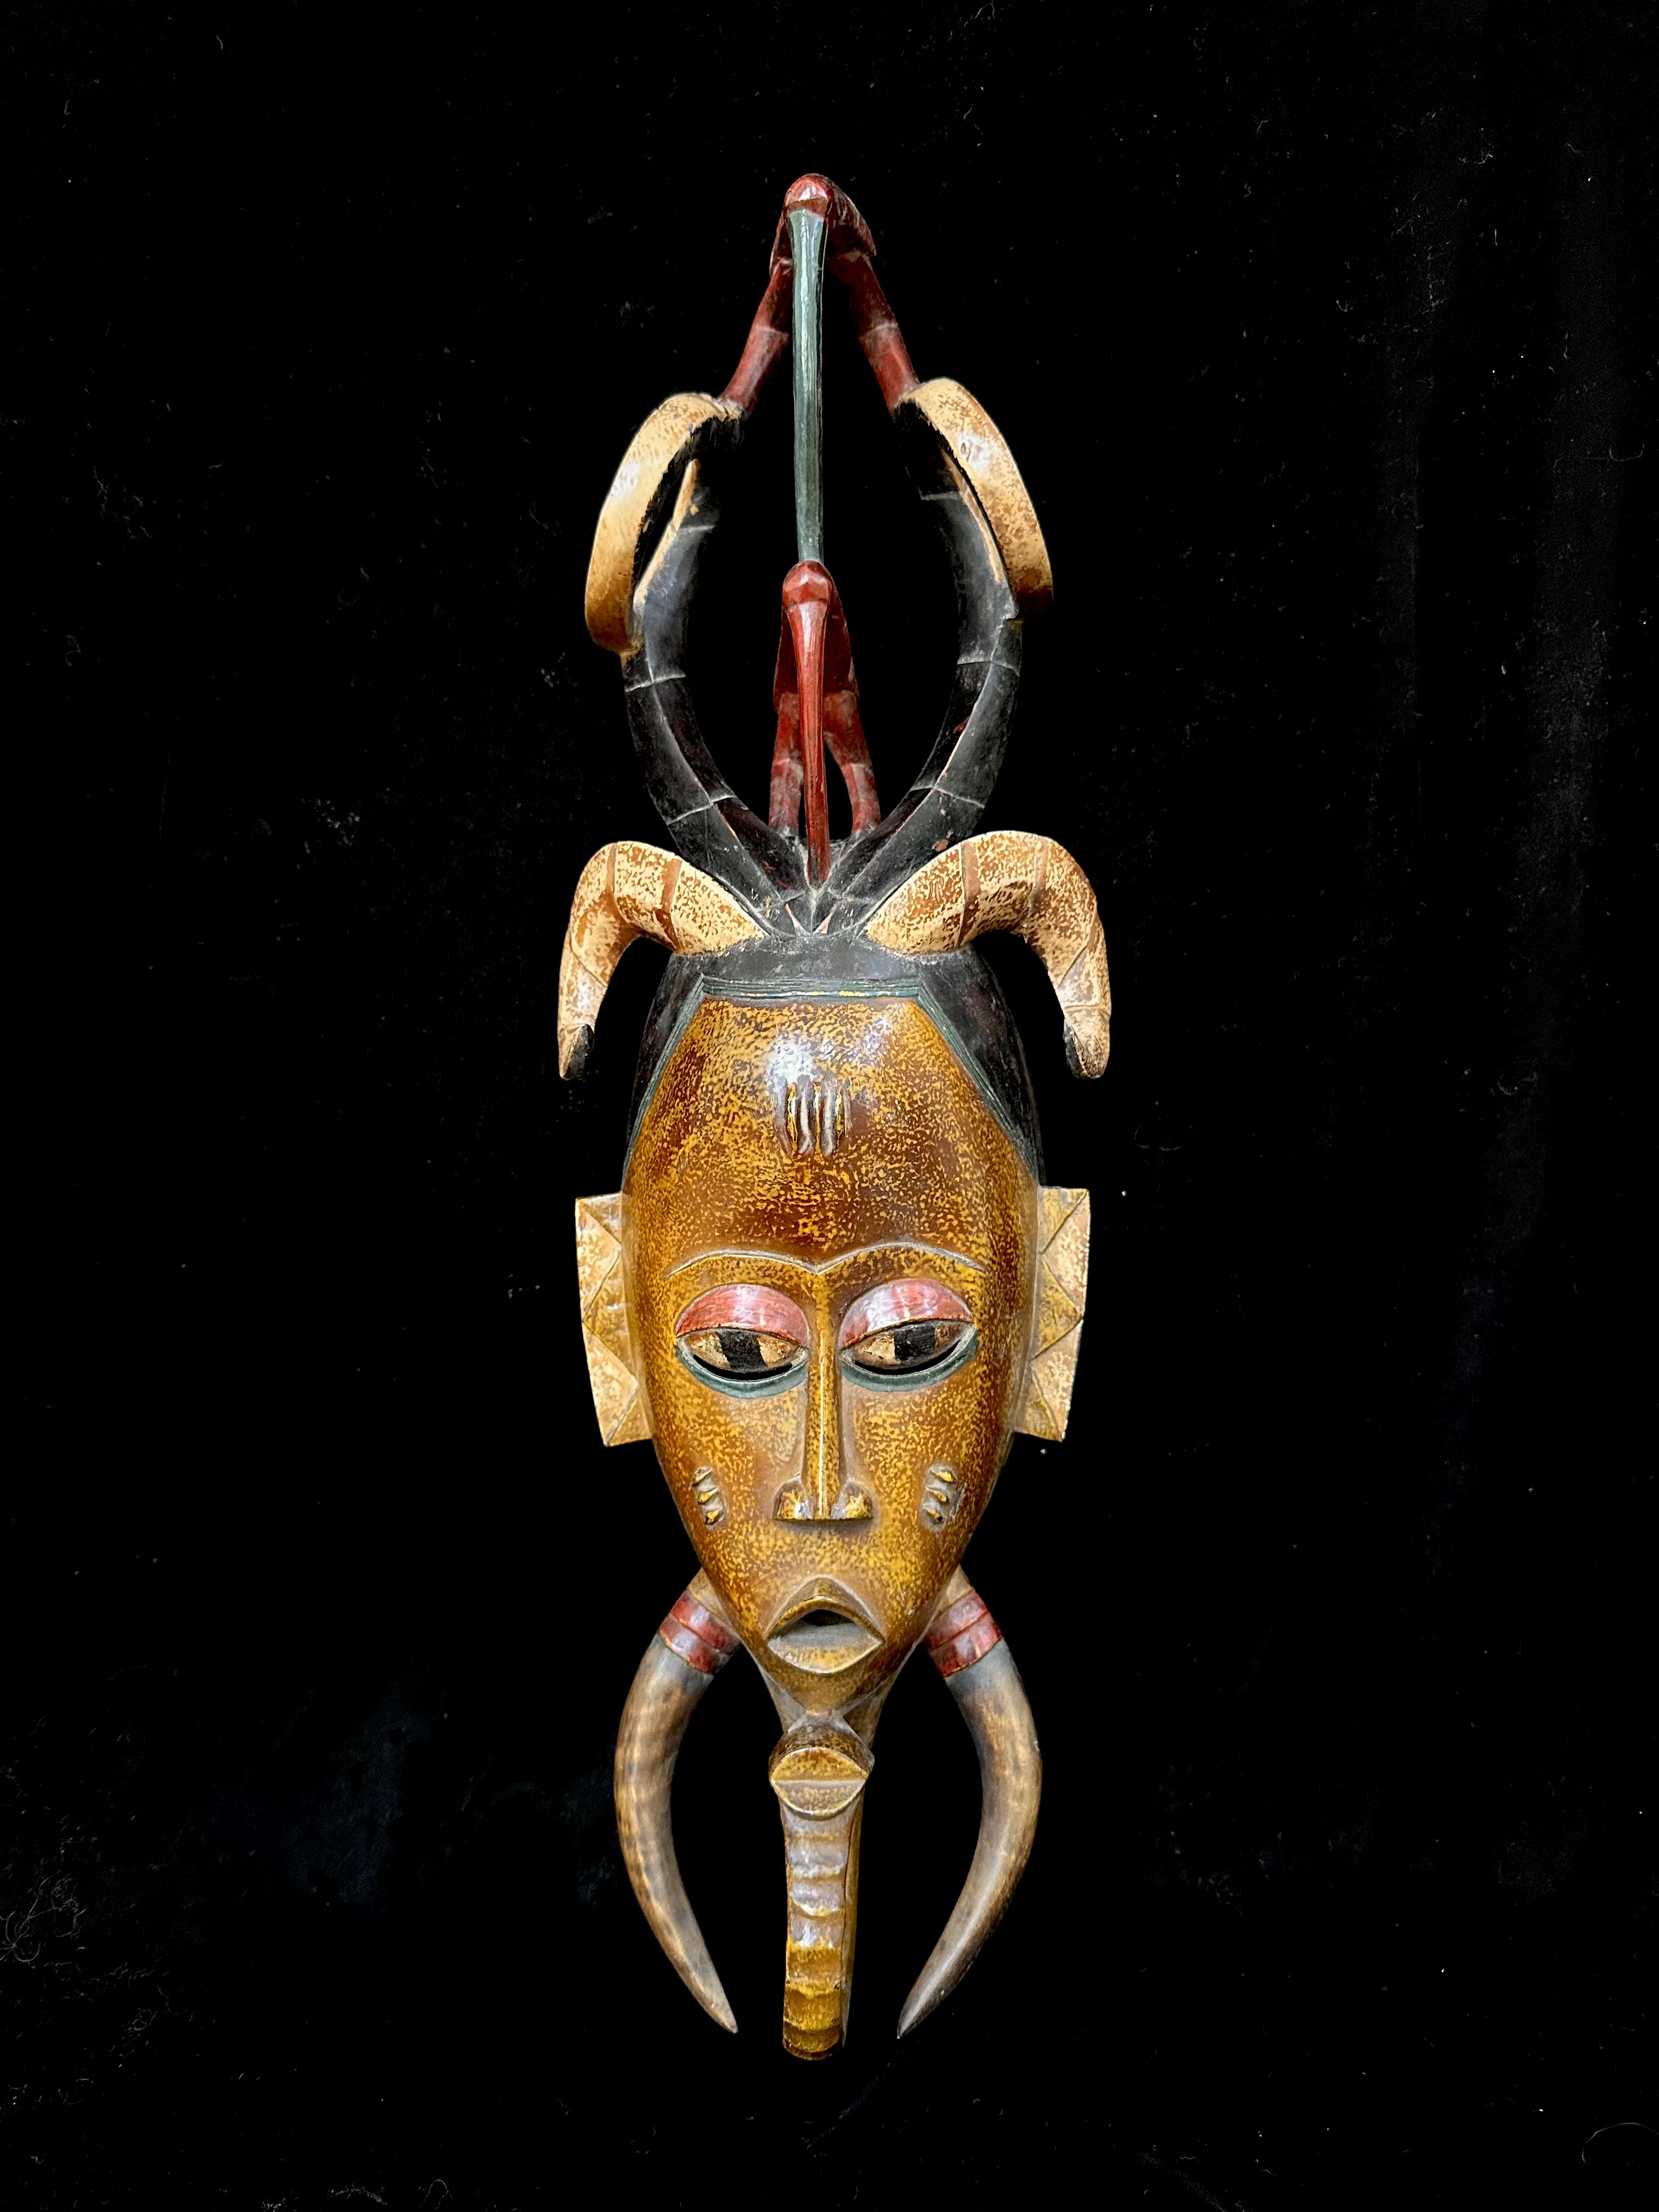 Zaouli Dance Mask with Elephant Trunk - Guro People - central Ivory Coast